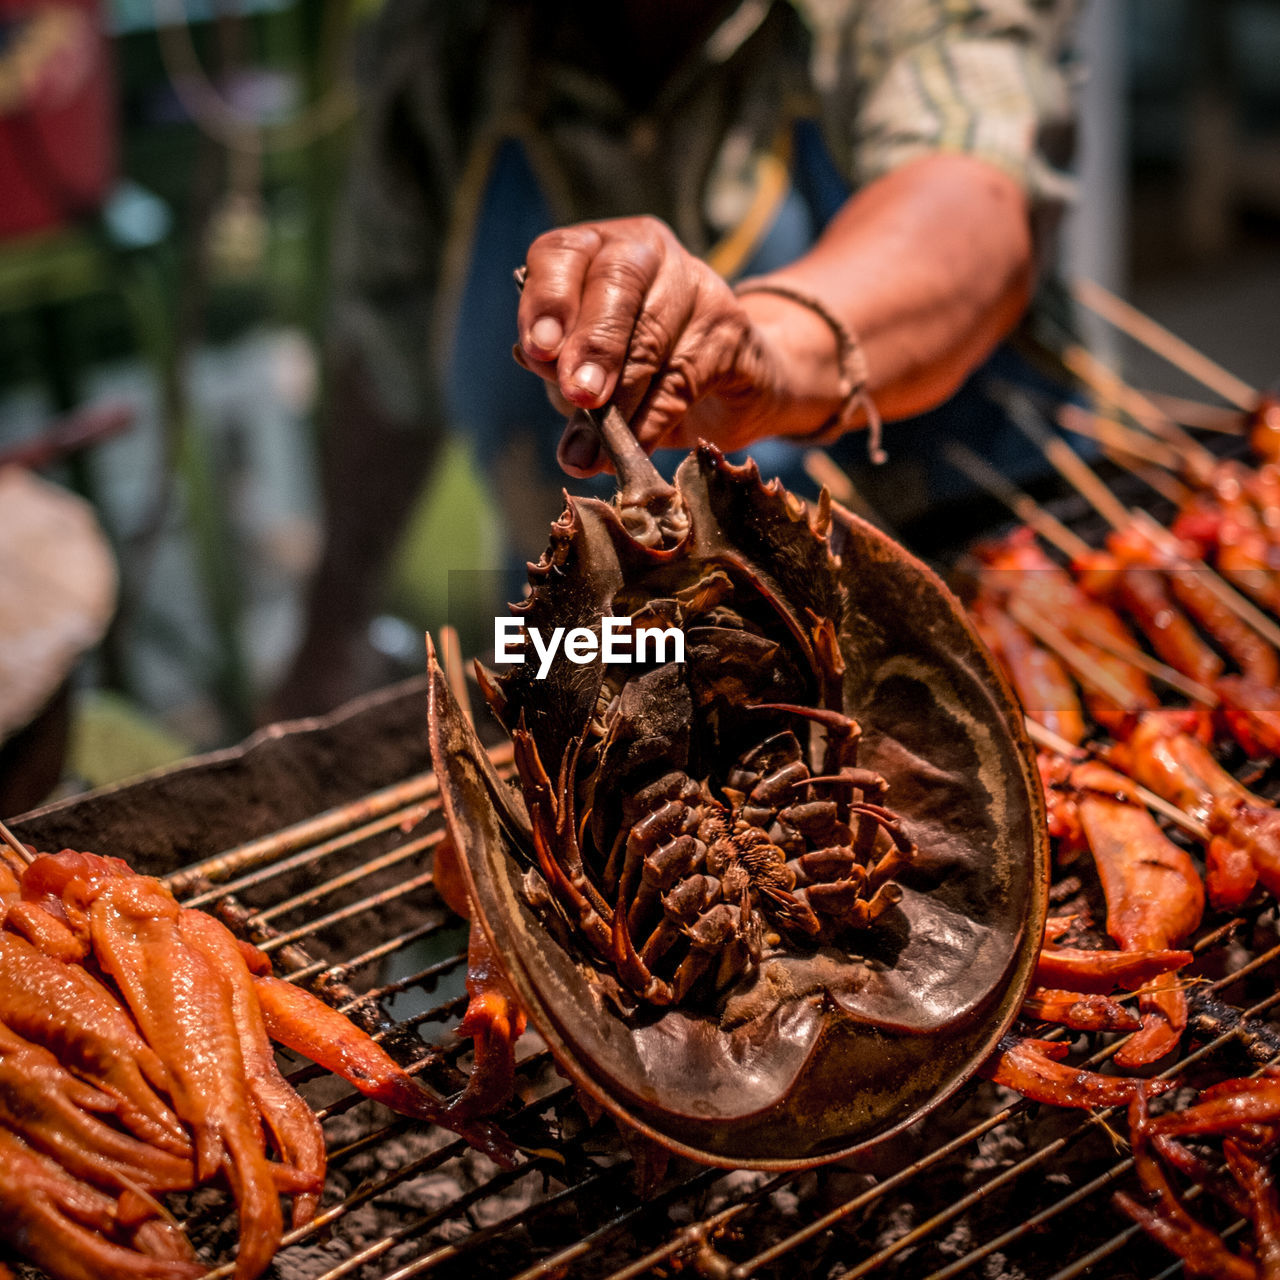 Midsection of vendor cooking seafood on barbecue grill